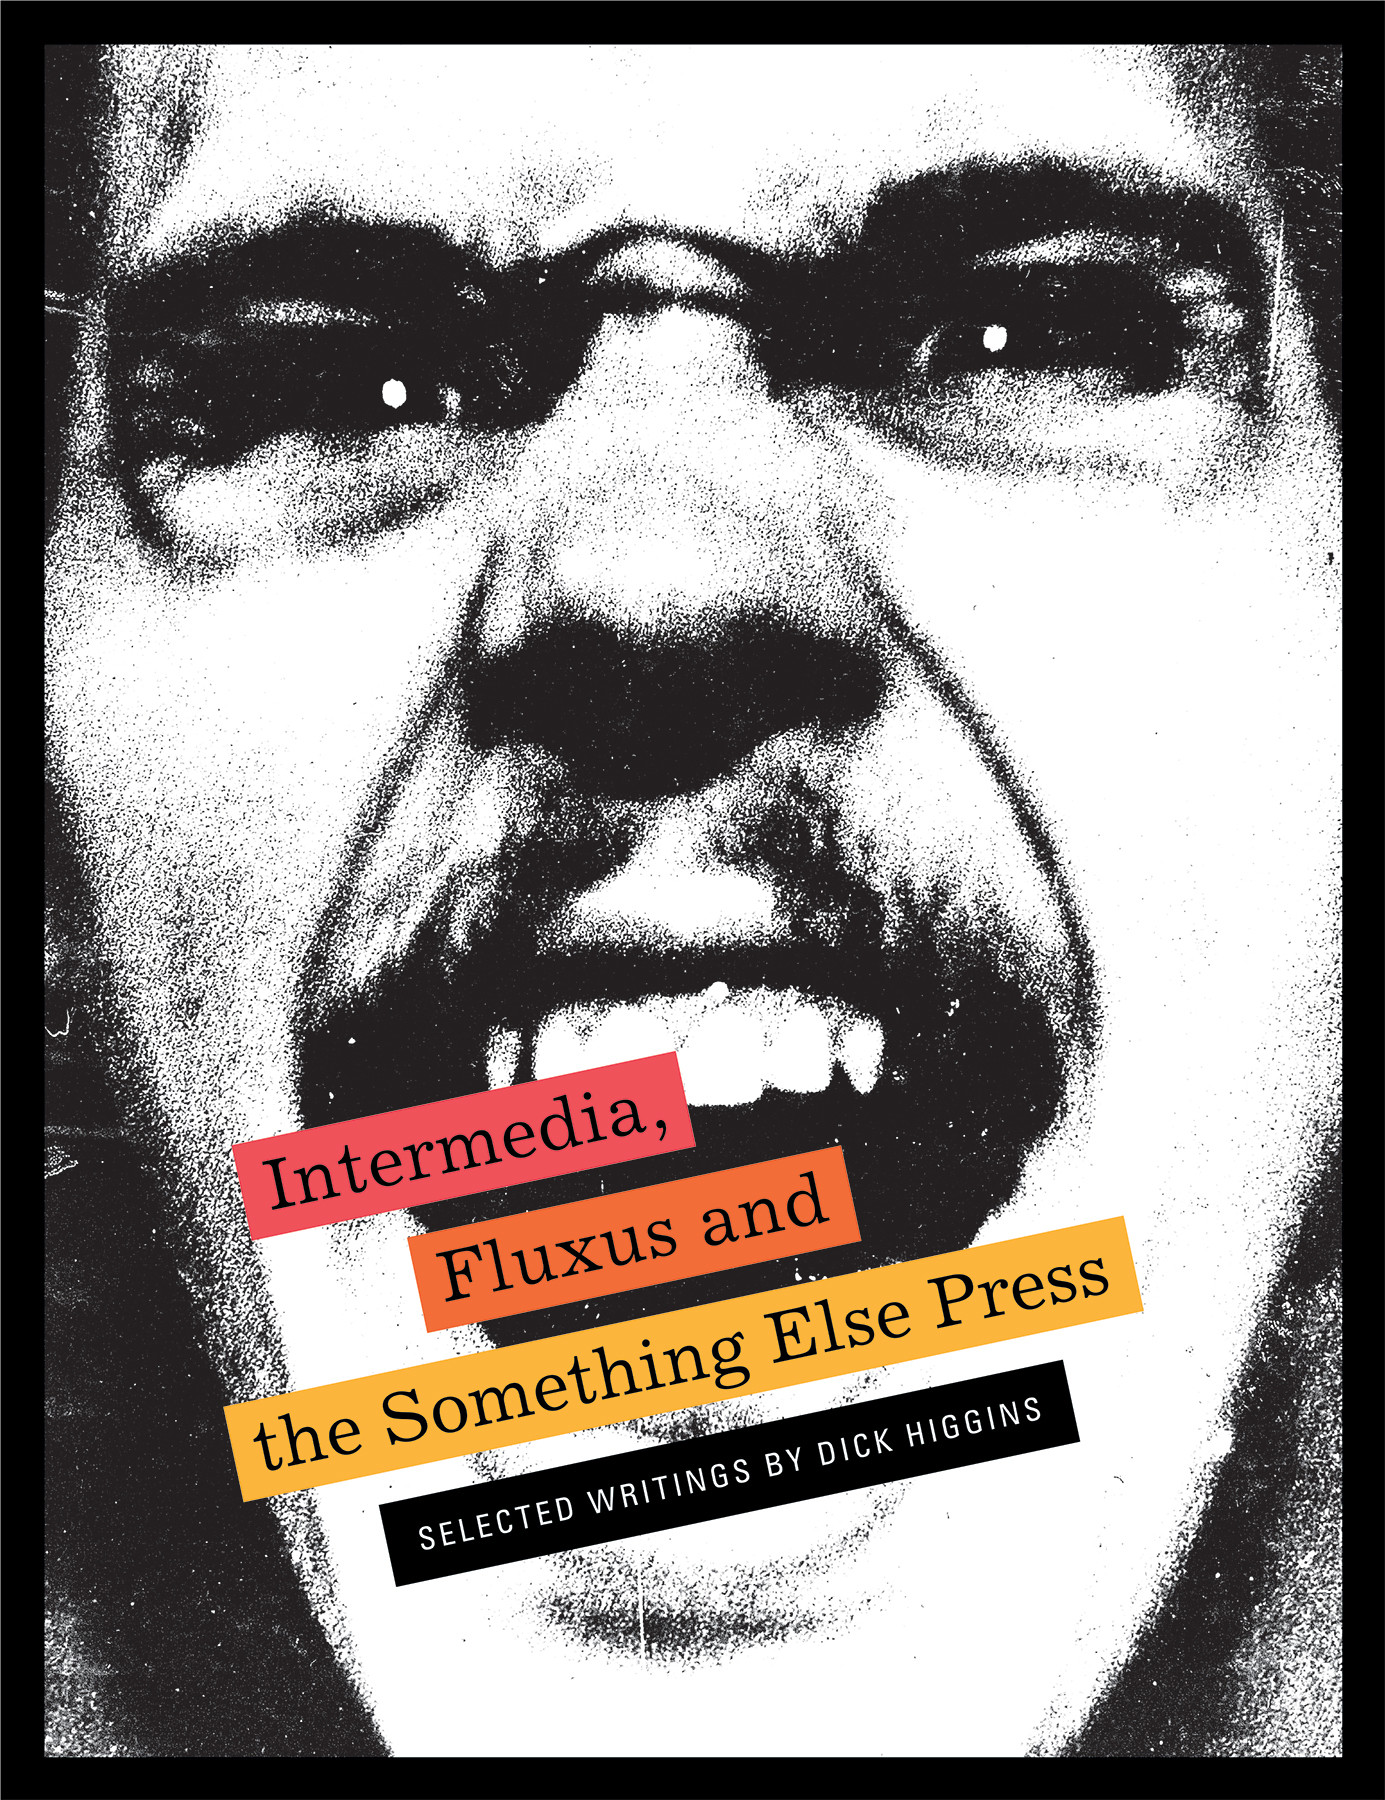 Intermedia, Fluxus and the Something Else Press: Selected Writings by Dick Higgins